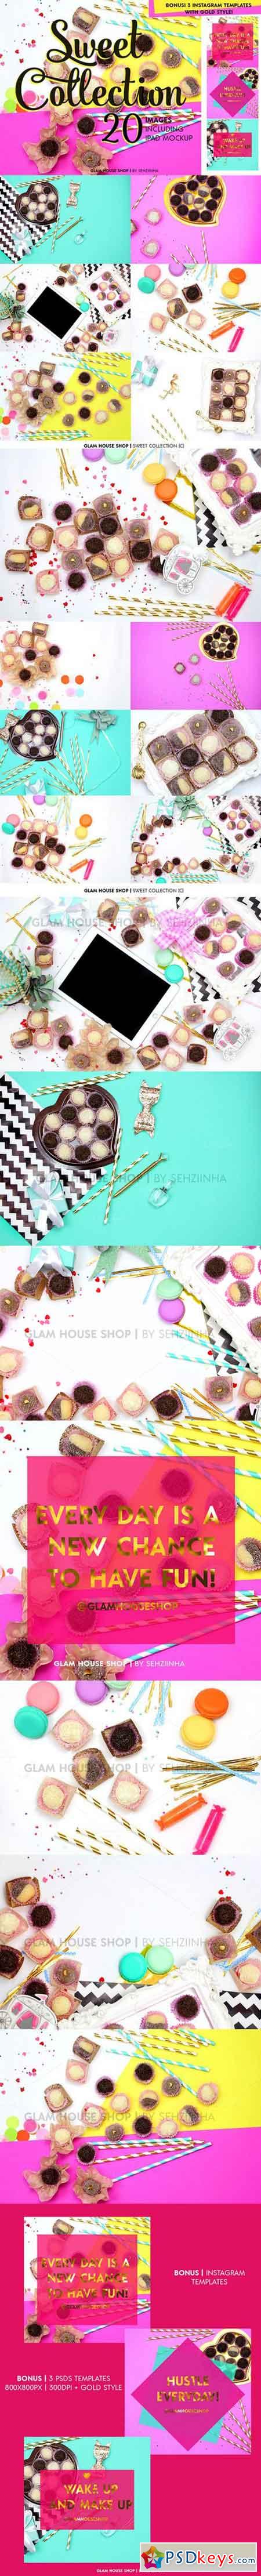 Sweet Collection Styled Stock Photos 928386